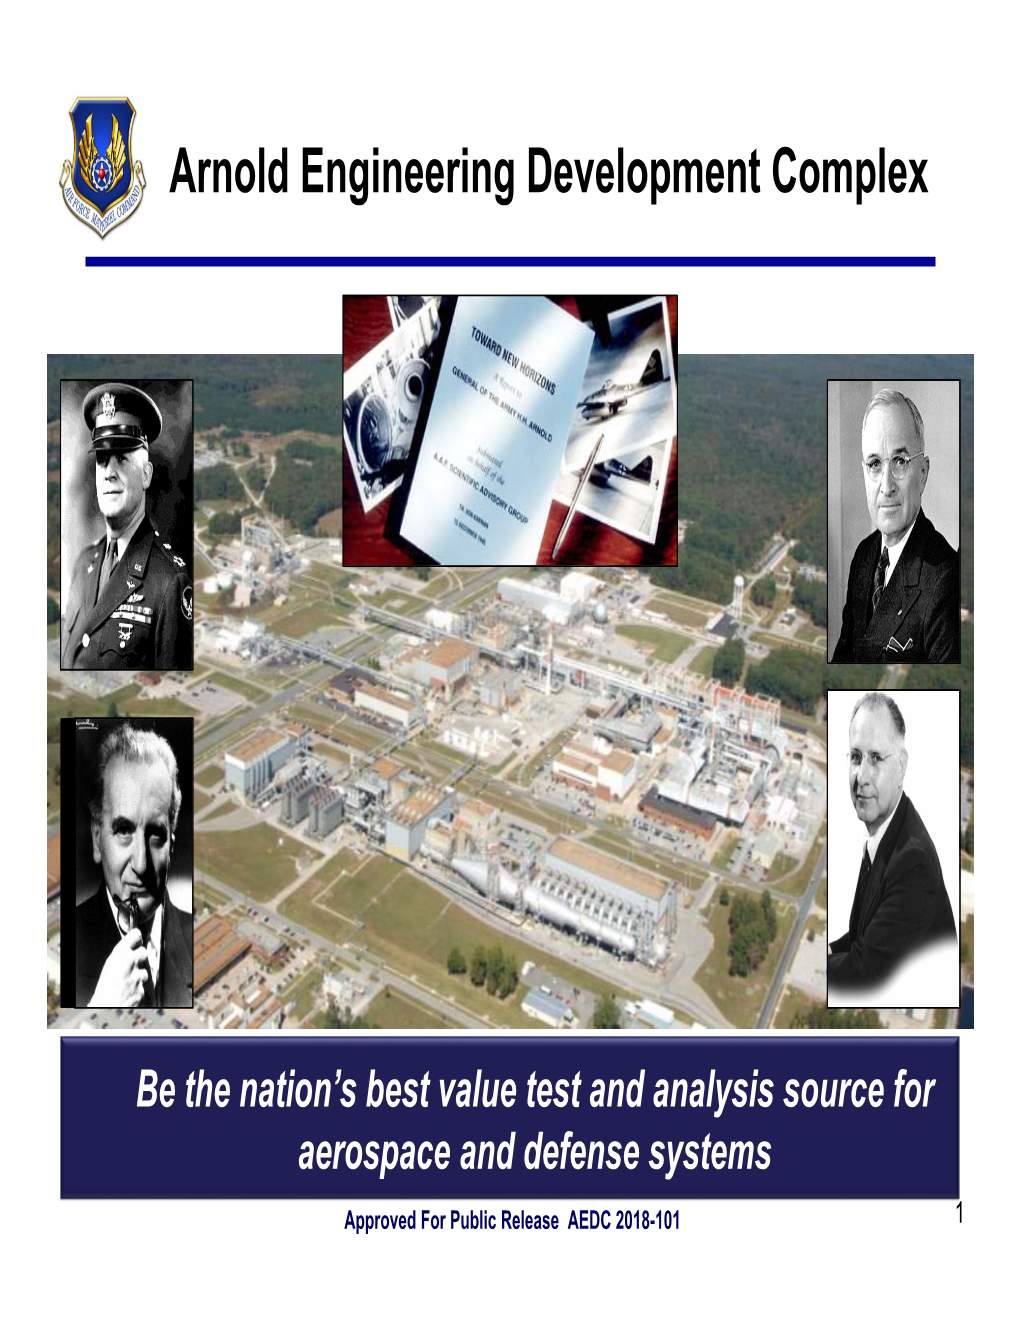 Arnold Engineering Development Complex (AEDC) Conduct Developmental Test and Evaluation for the Nation